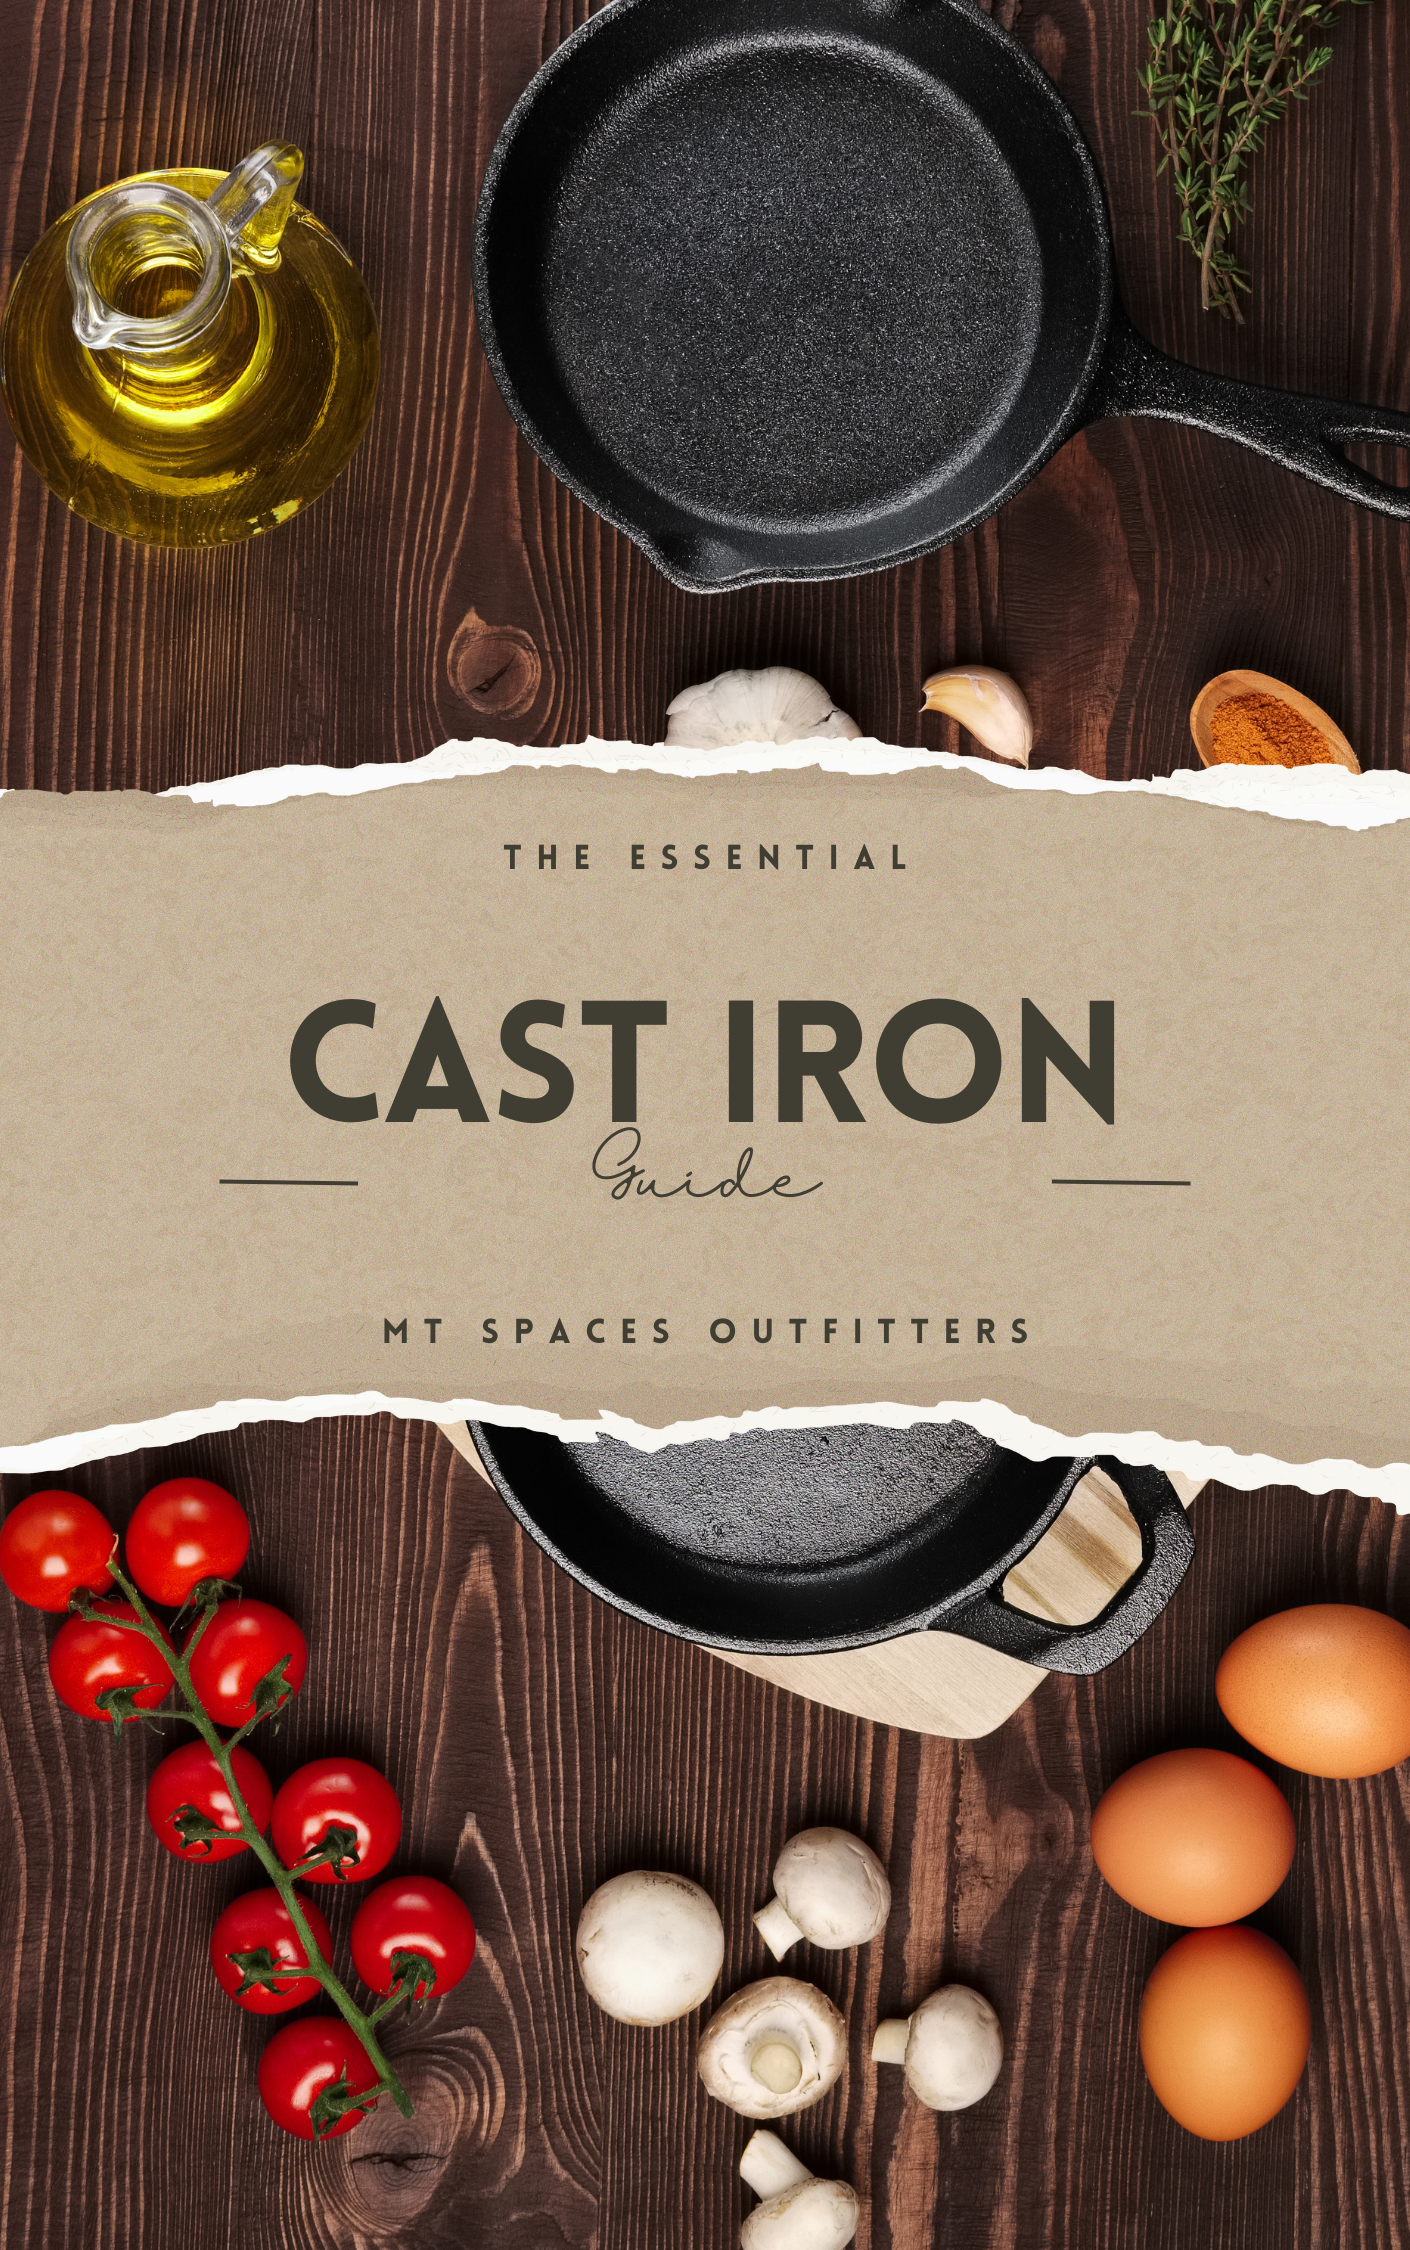 The Essential Cast Iron Guide - MT Spaces Outfitters